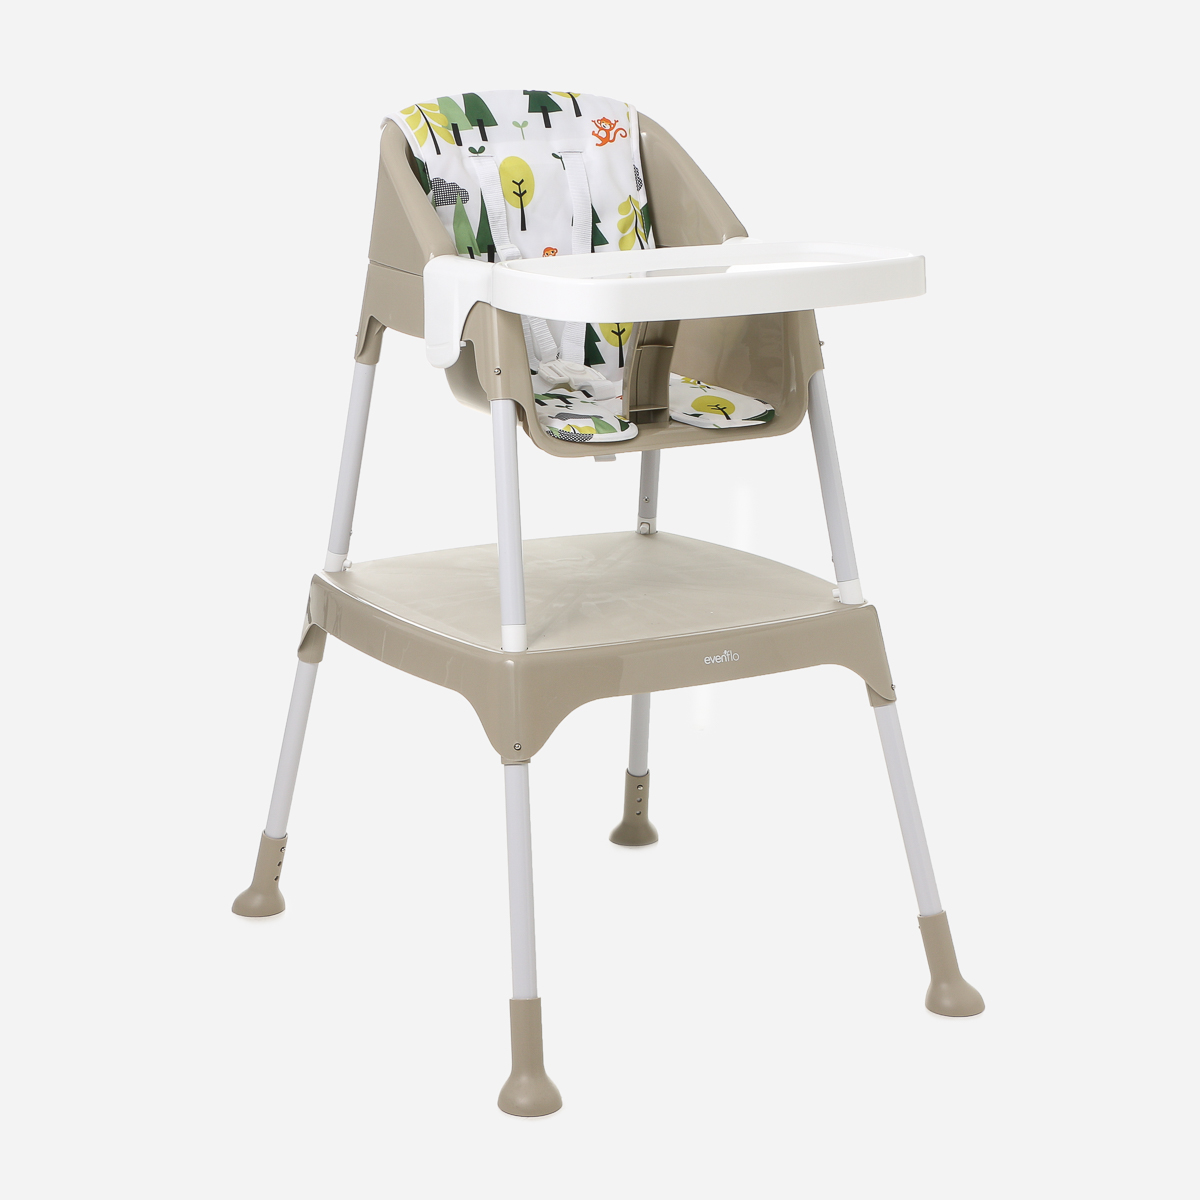 Shopsm Evenflo Trillo 3 In 1 Convertible High Chair Trees